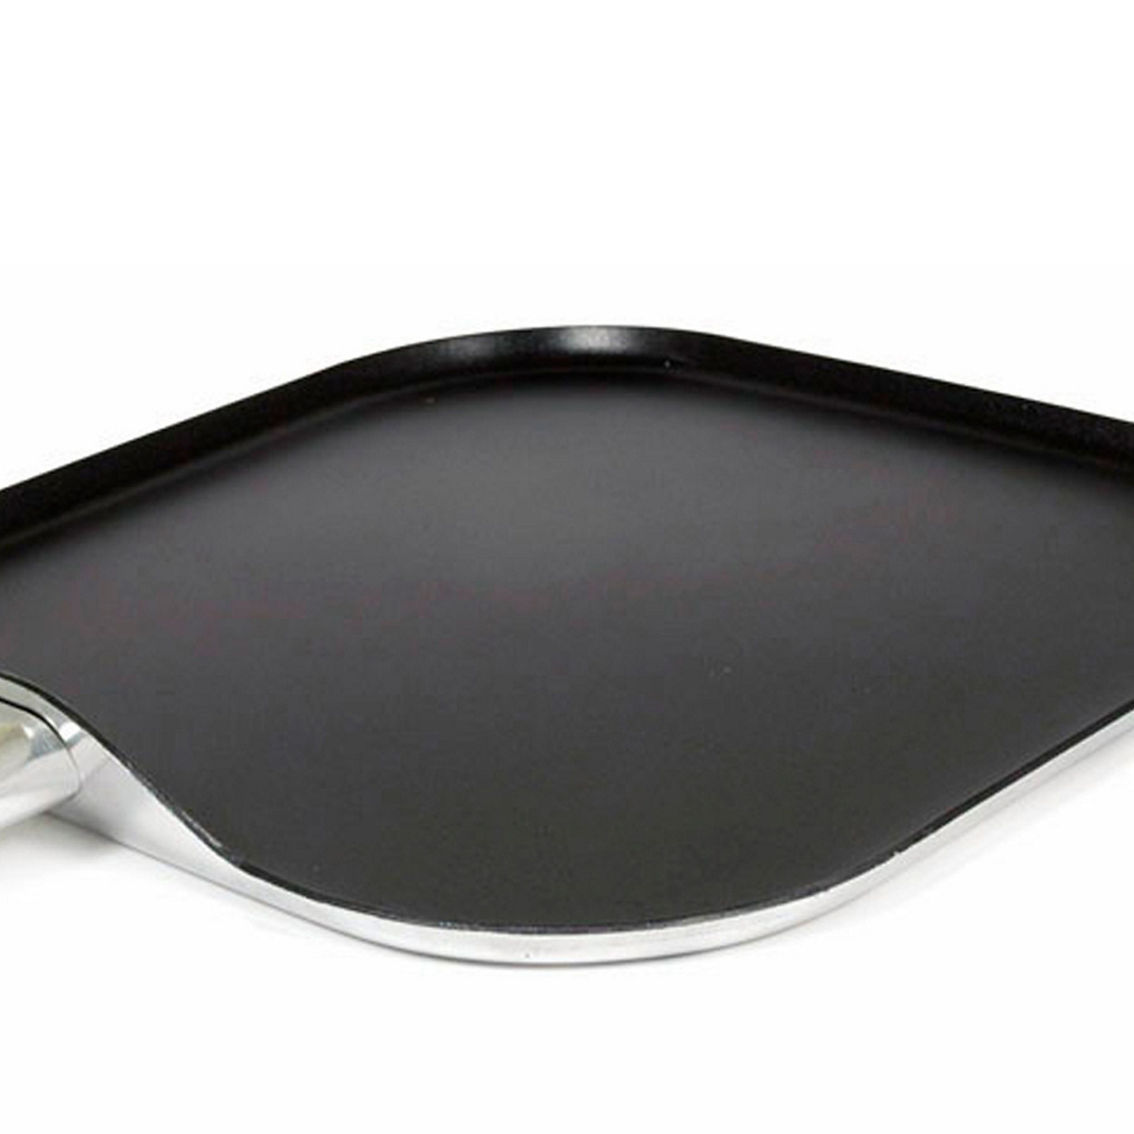 Better Chef 11 Inch Aluminum Non-Stick Square Griddle in Black - Image 2 of 4